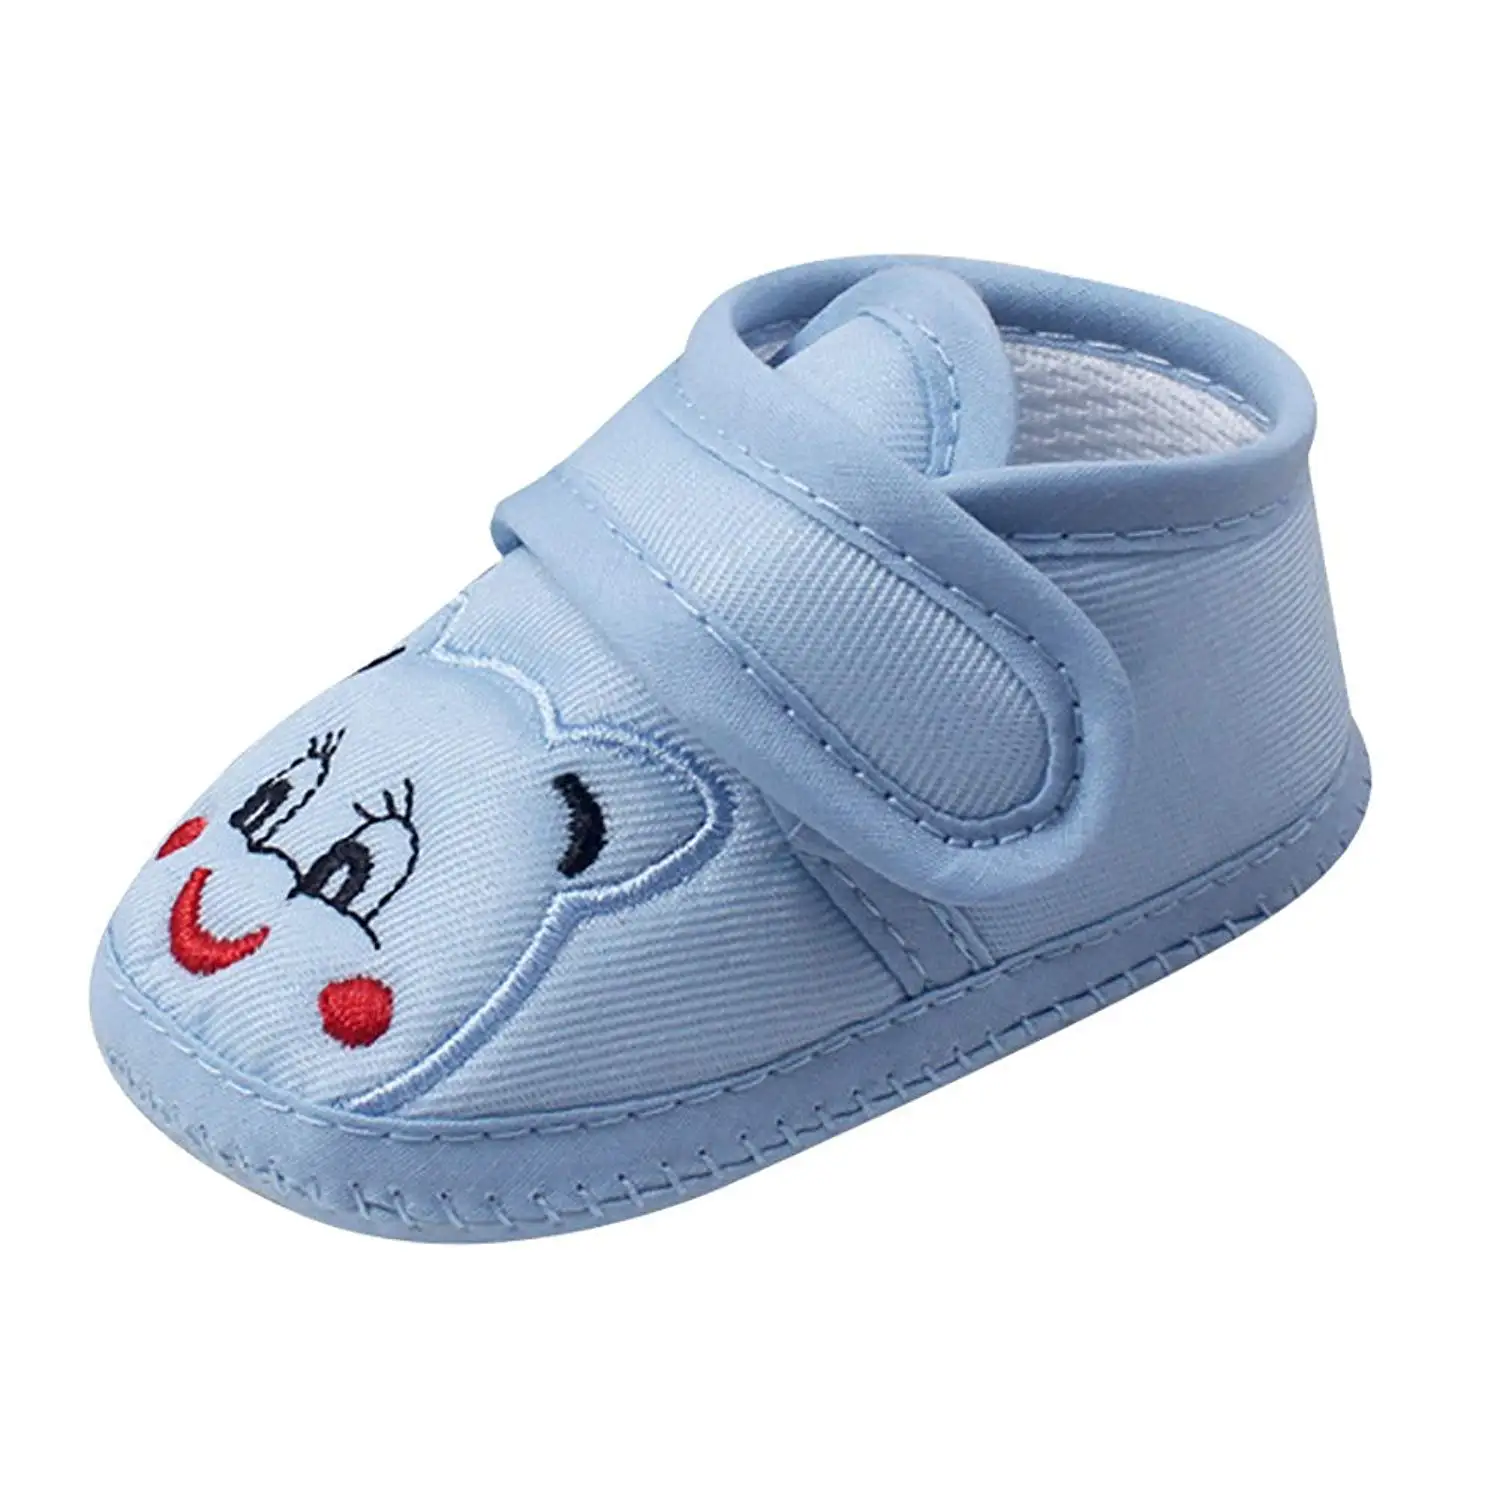 baby shoes size 12 to 18 months